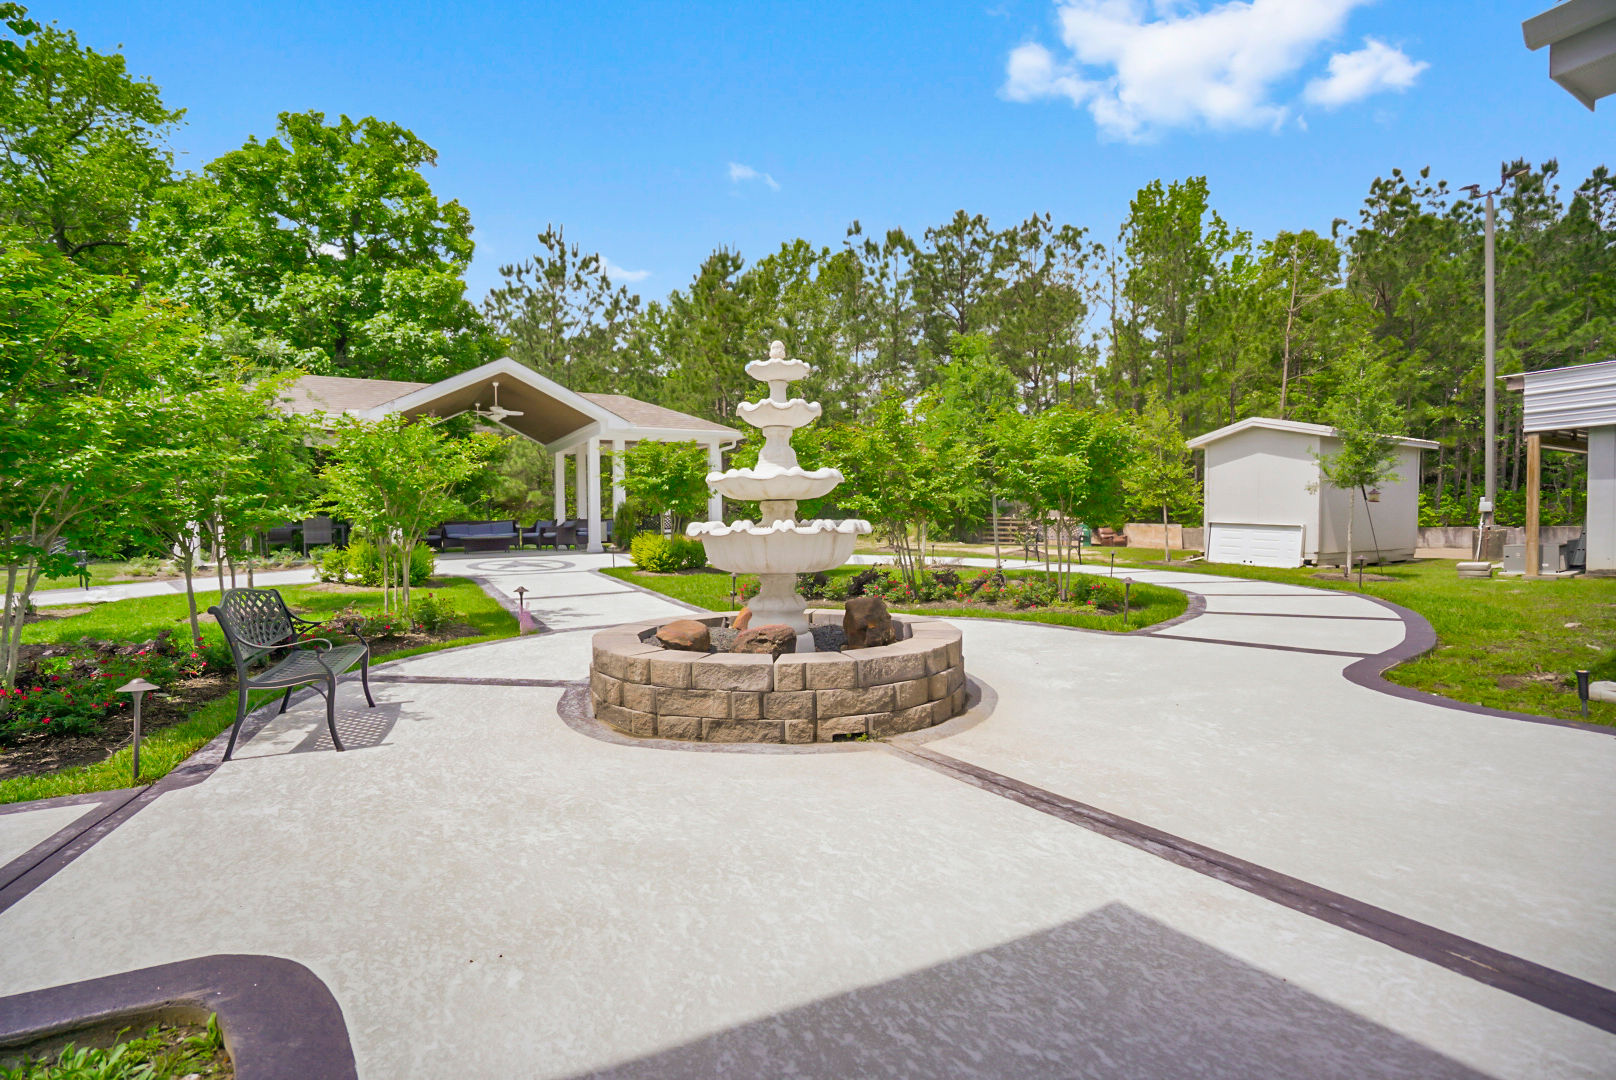 The highly maintained courtyard area at Sundale Senior Living in Huntsville, TX, featuring a fountain, walking paths, and gazebo